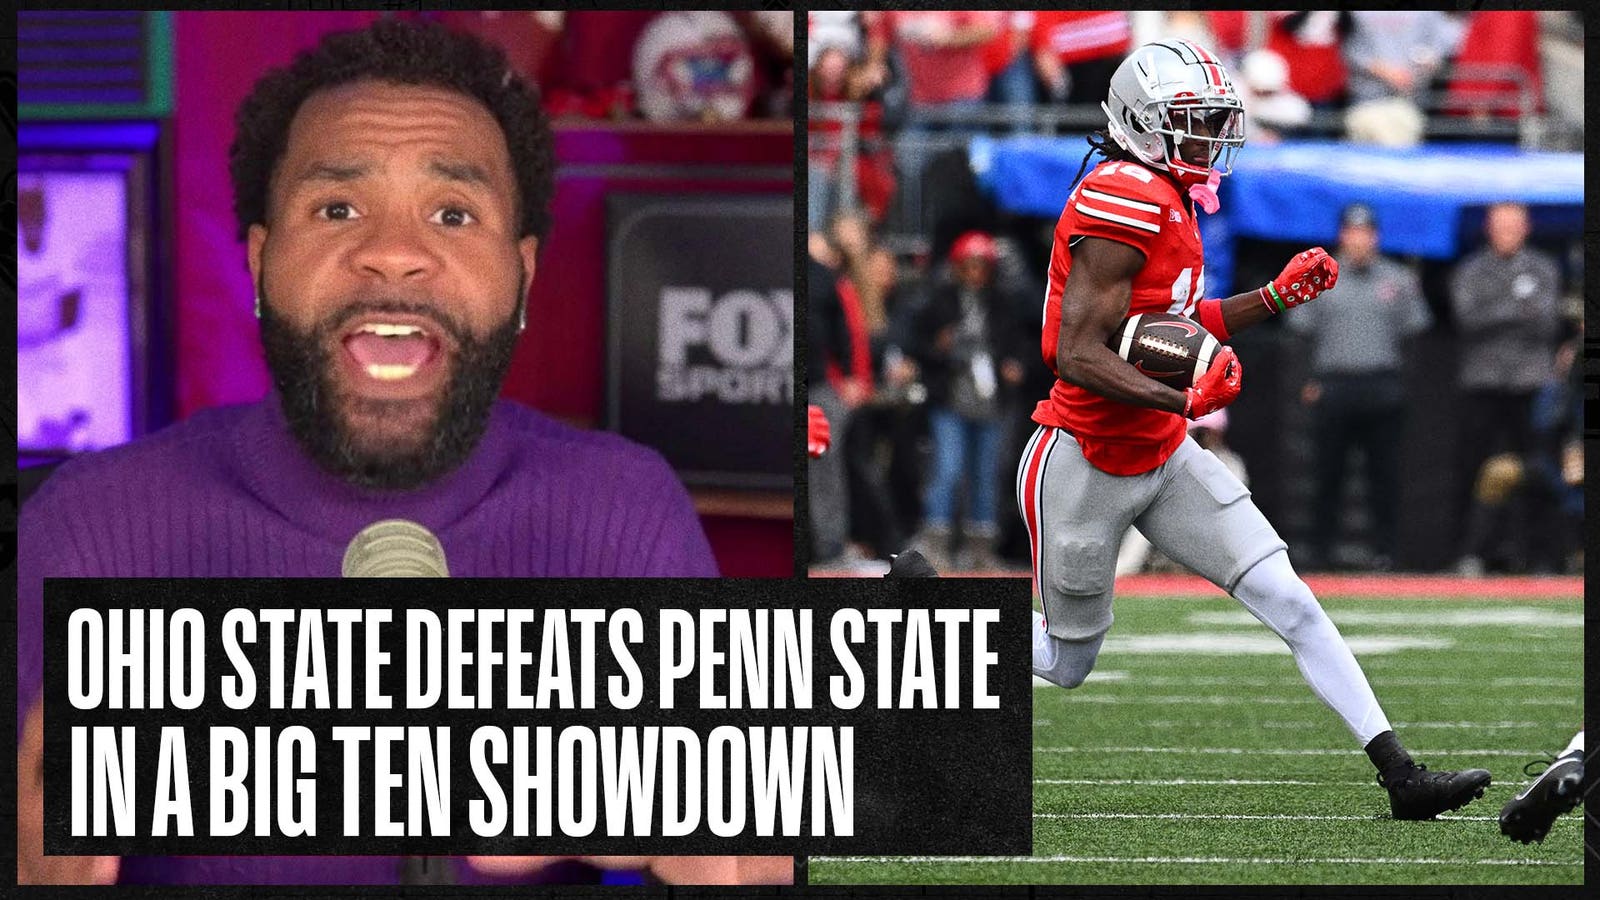 What does Ohio State's win mean for the Buckeyes moving forward?